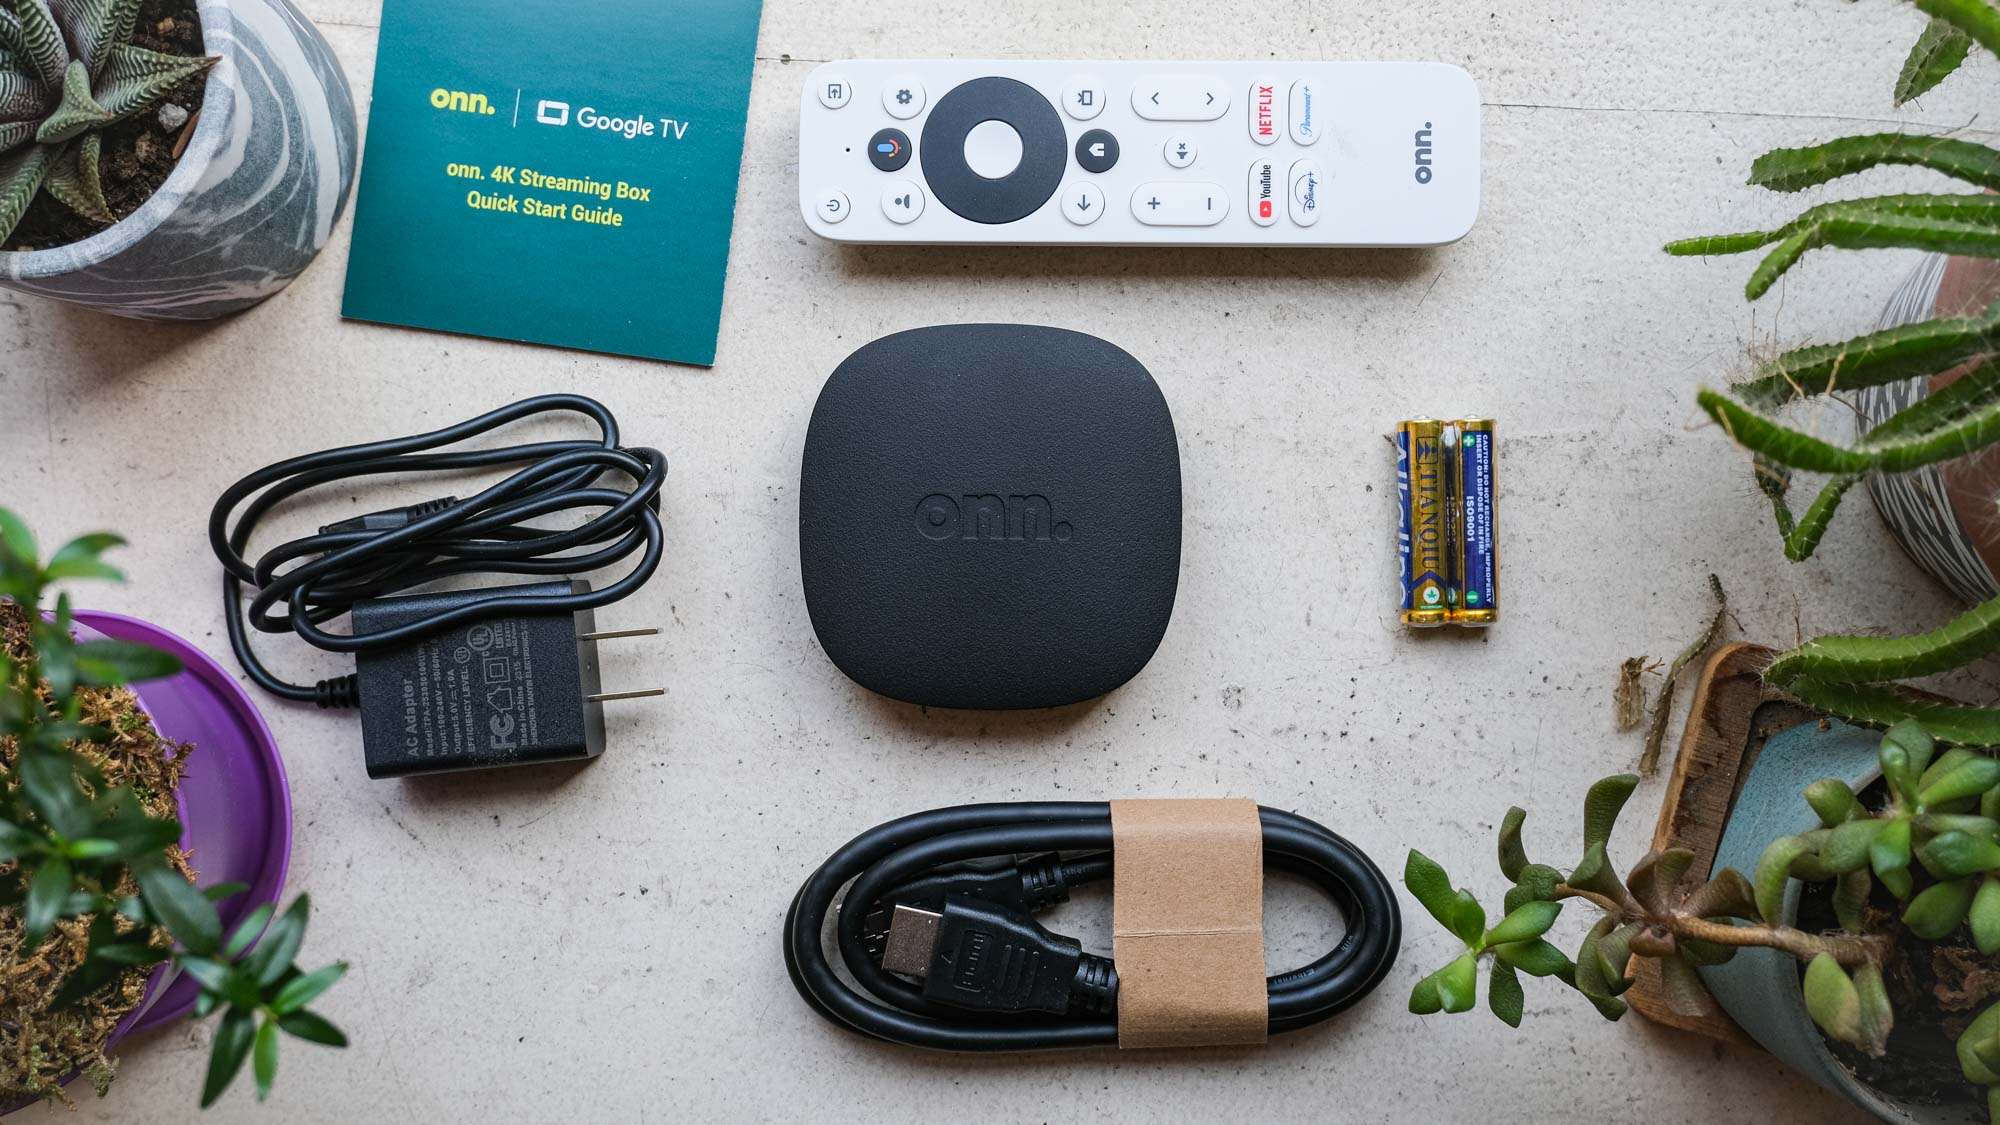 Streaming box on Google TV 4K onn center (clockwise from top) remote control, its battery, HDMI cord, power adapter and quick start guide